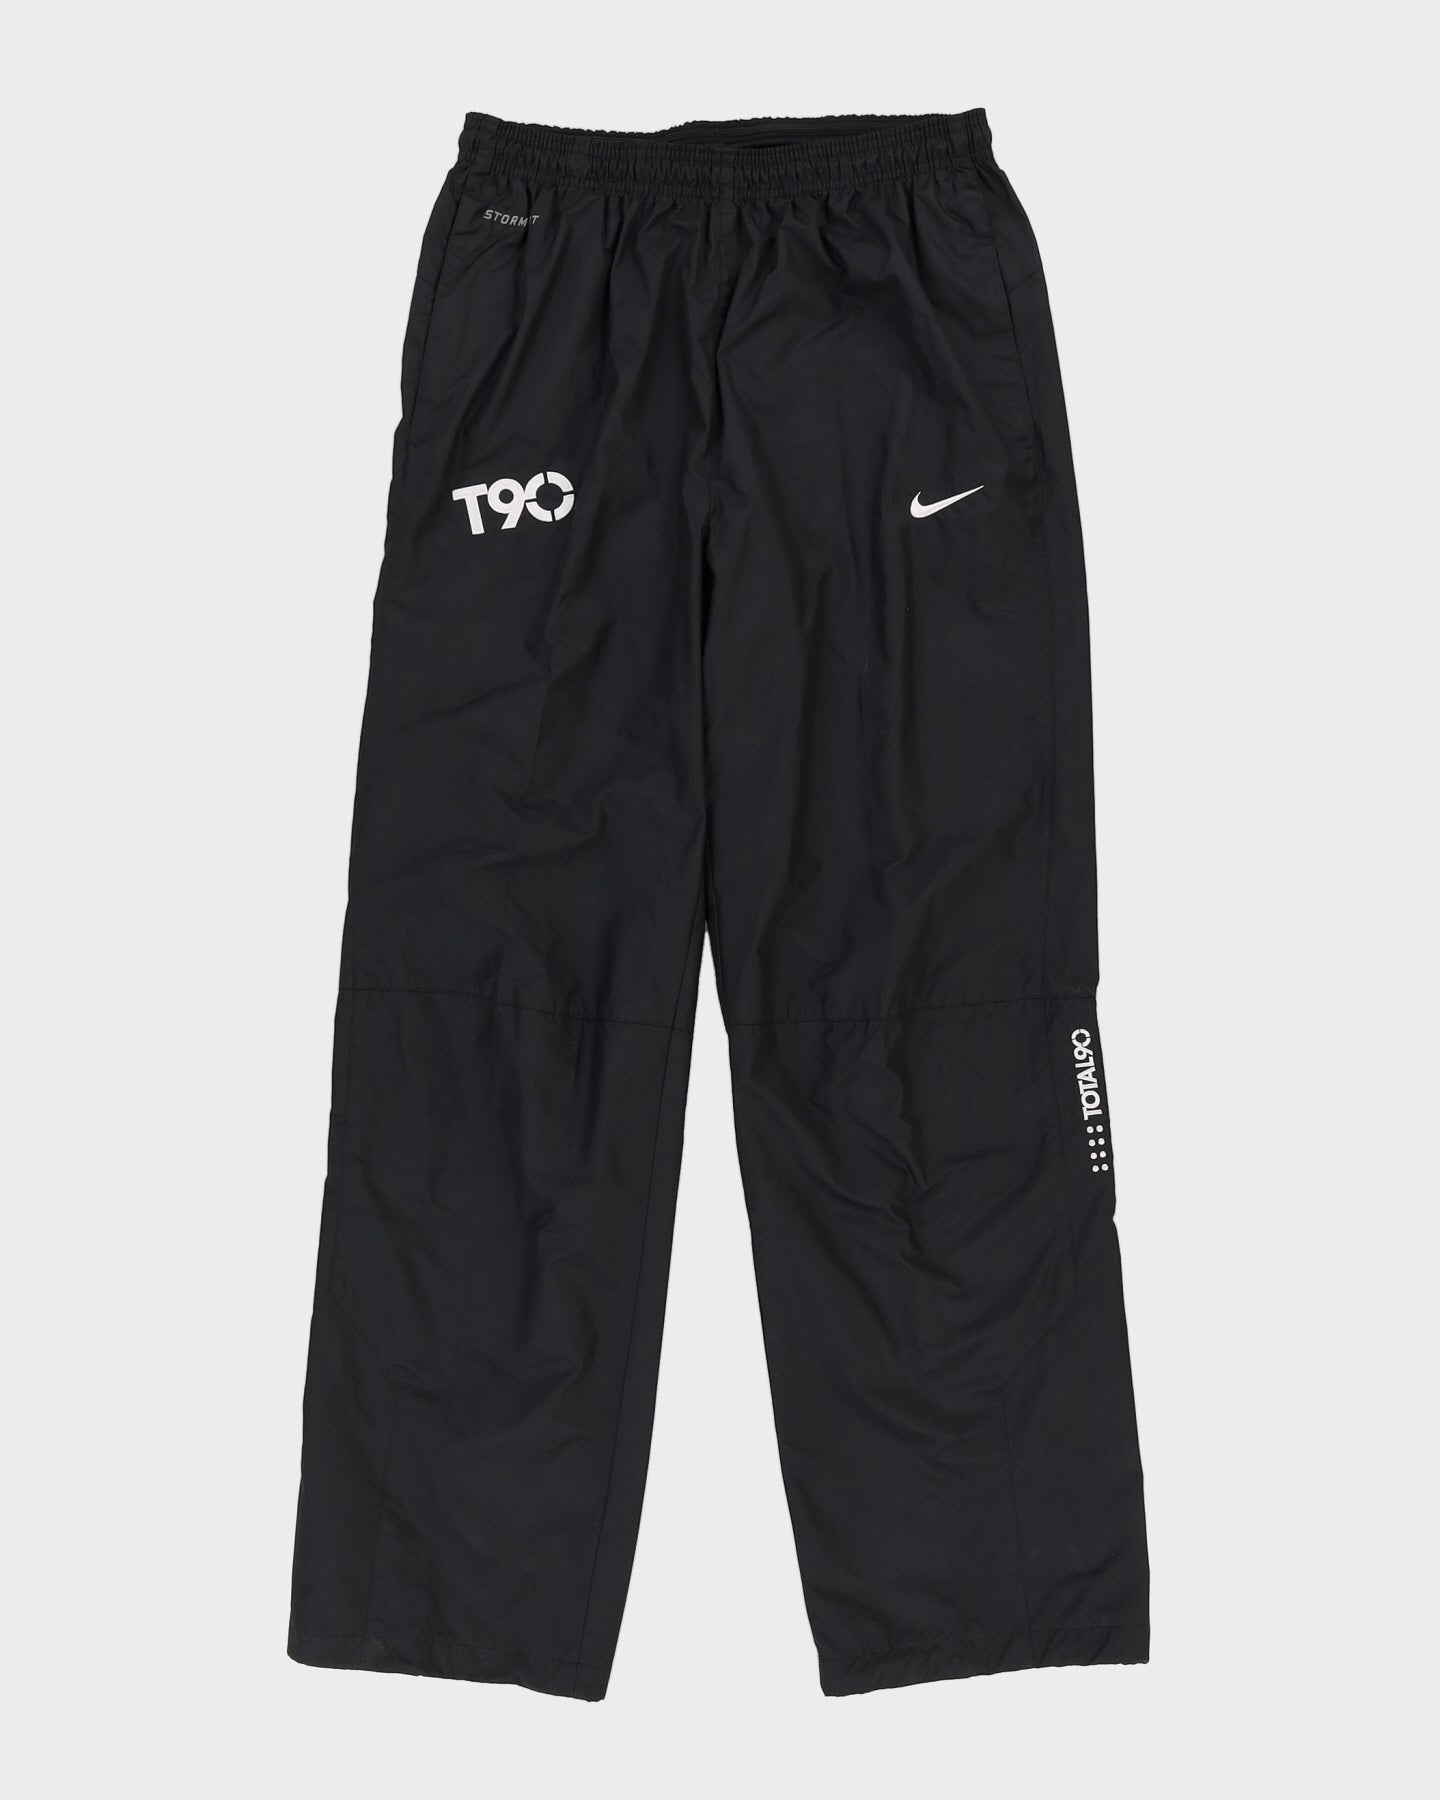 00s Nike Total 90 Black Embroidered Logos Track Bottoms - XL